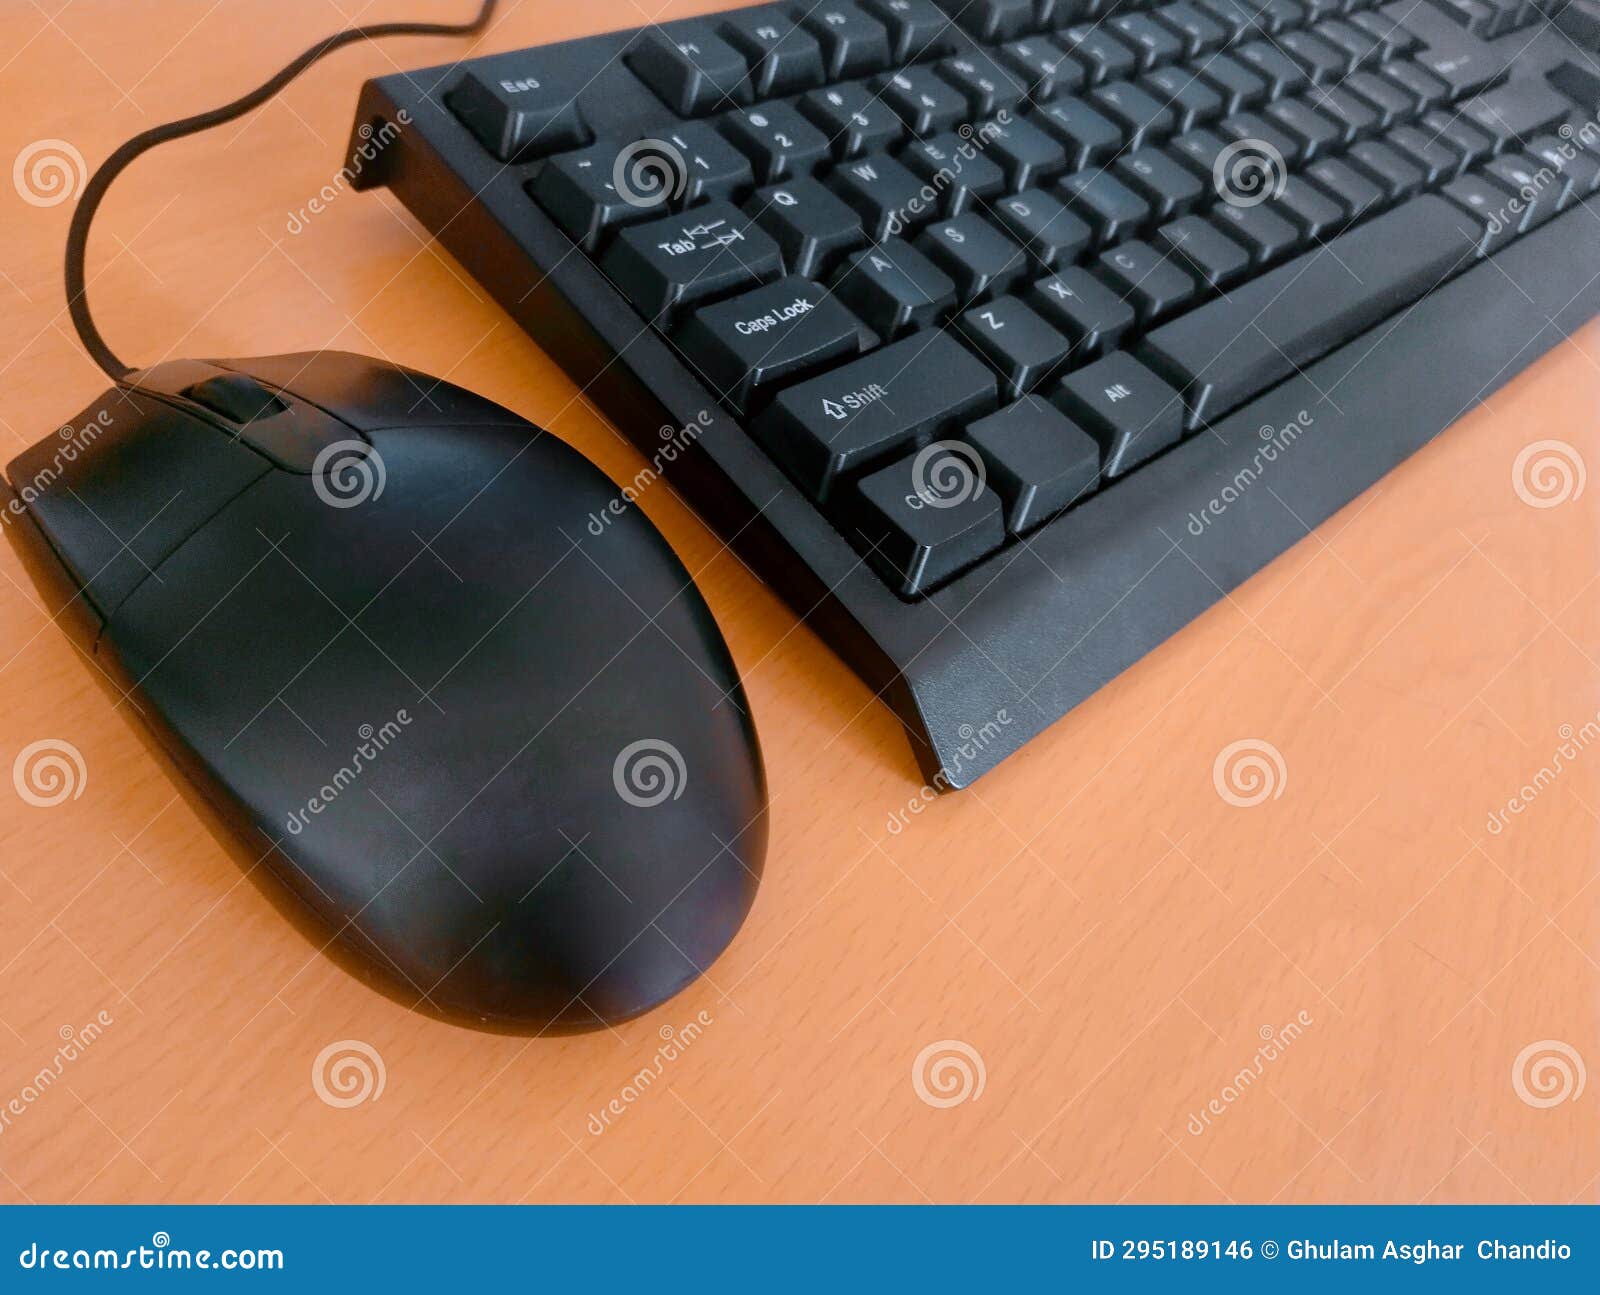 keyboard and mouse of desktop computer system, pc input devices keypad un clavier une souris, teclado m teclar digitar photo